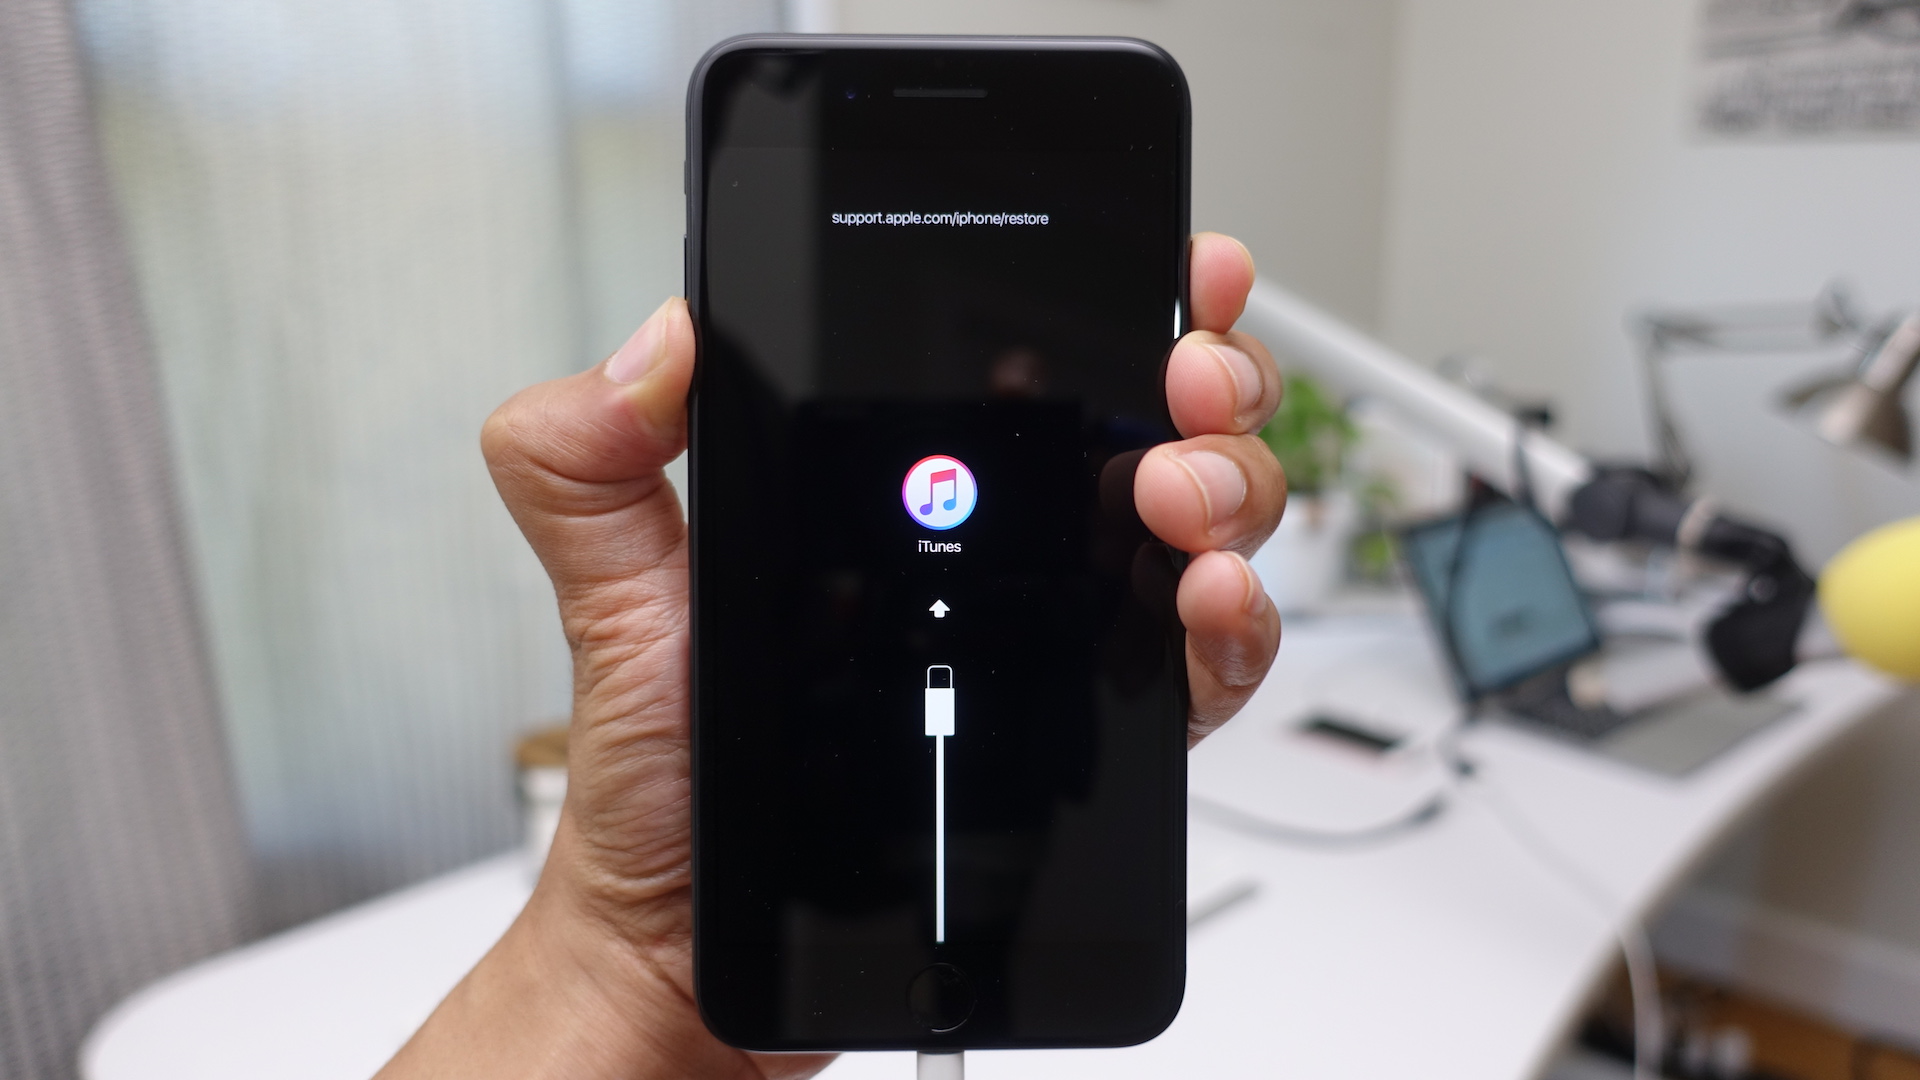 how to hard reset iphone 7 , how to search an image on iphone